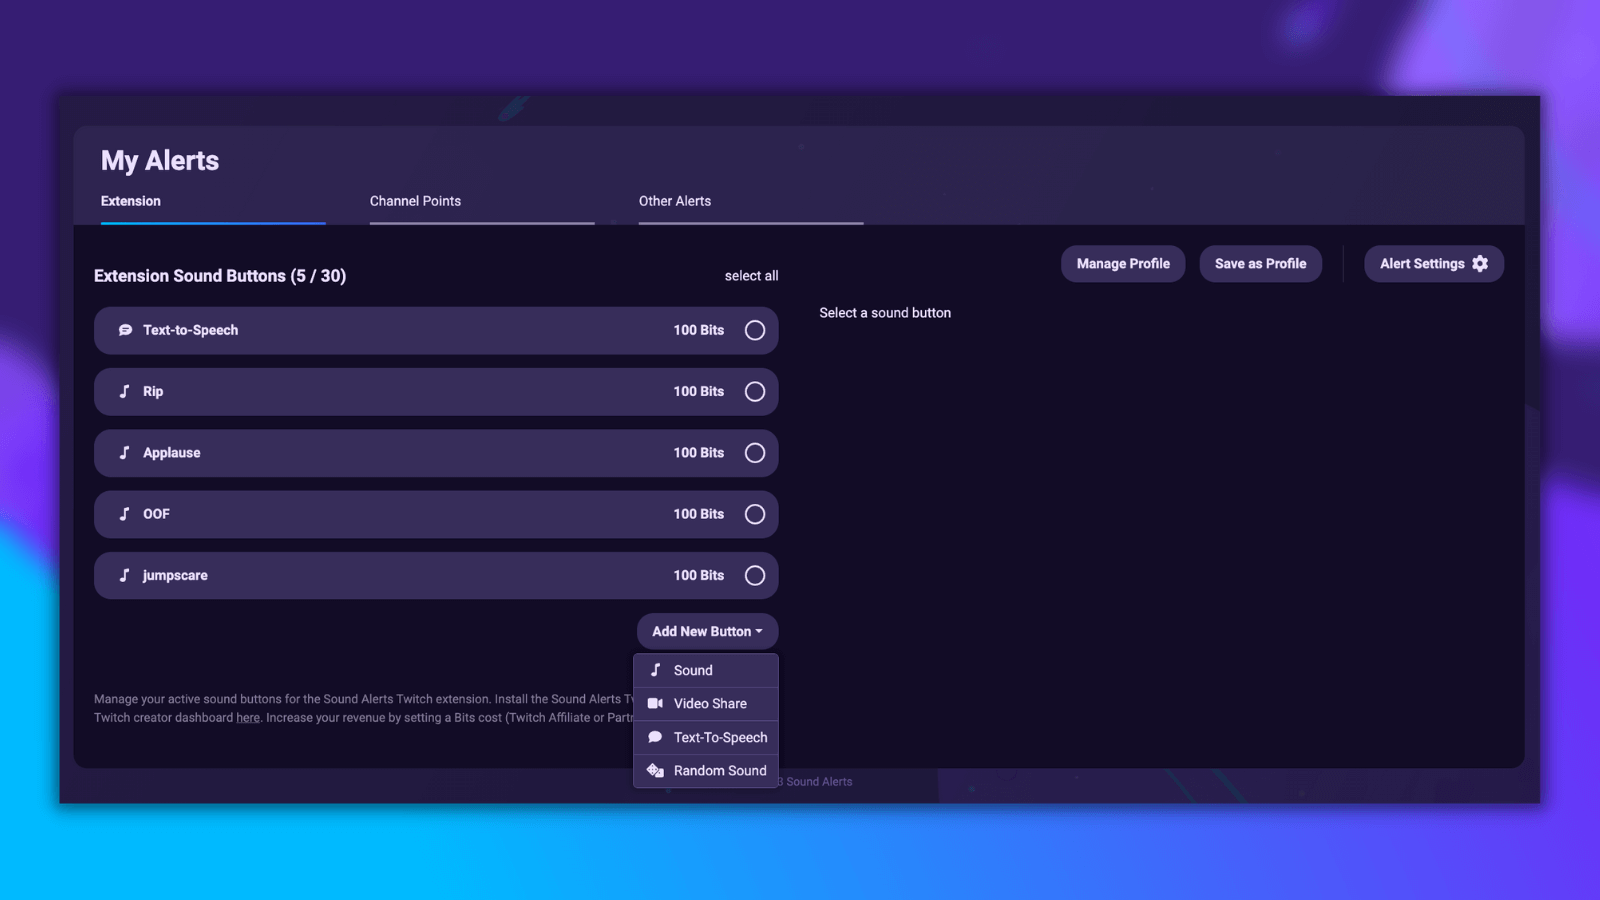 This image shows the Sound Alerts Dashboard and the process of adding a Video Share Alert Button to the Twitch Extension.